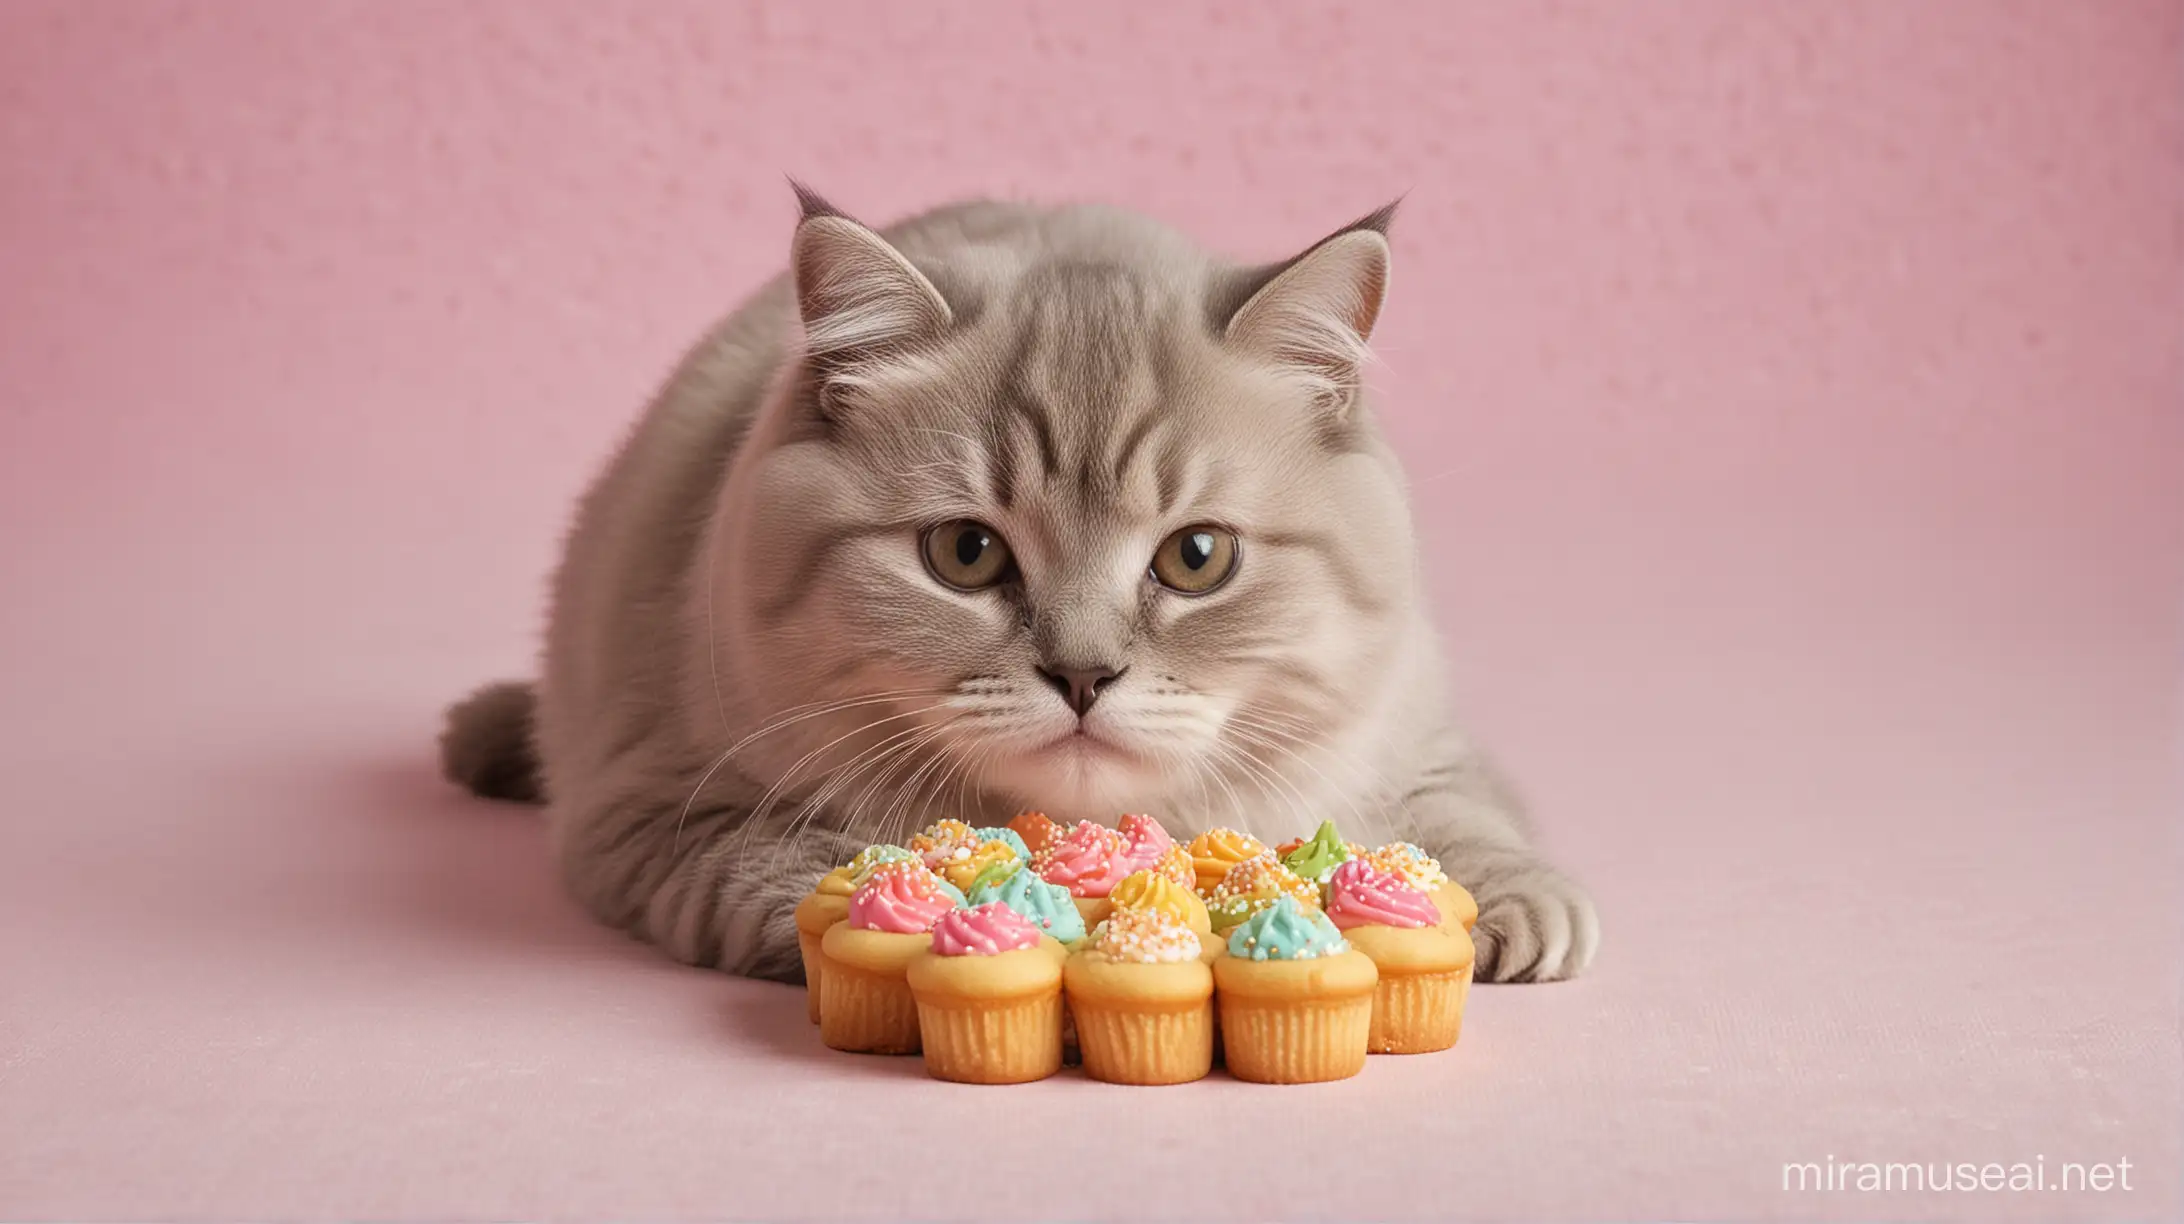 Adorable Fat Kitten Enjoying Sweets with Playful Fours and Colorful Chupps